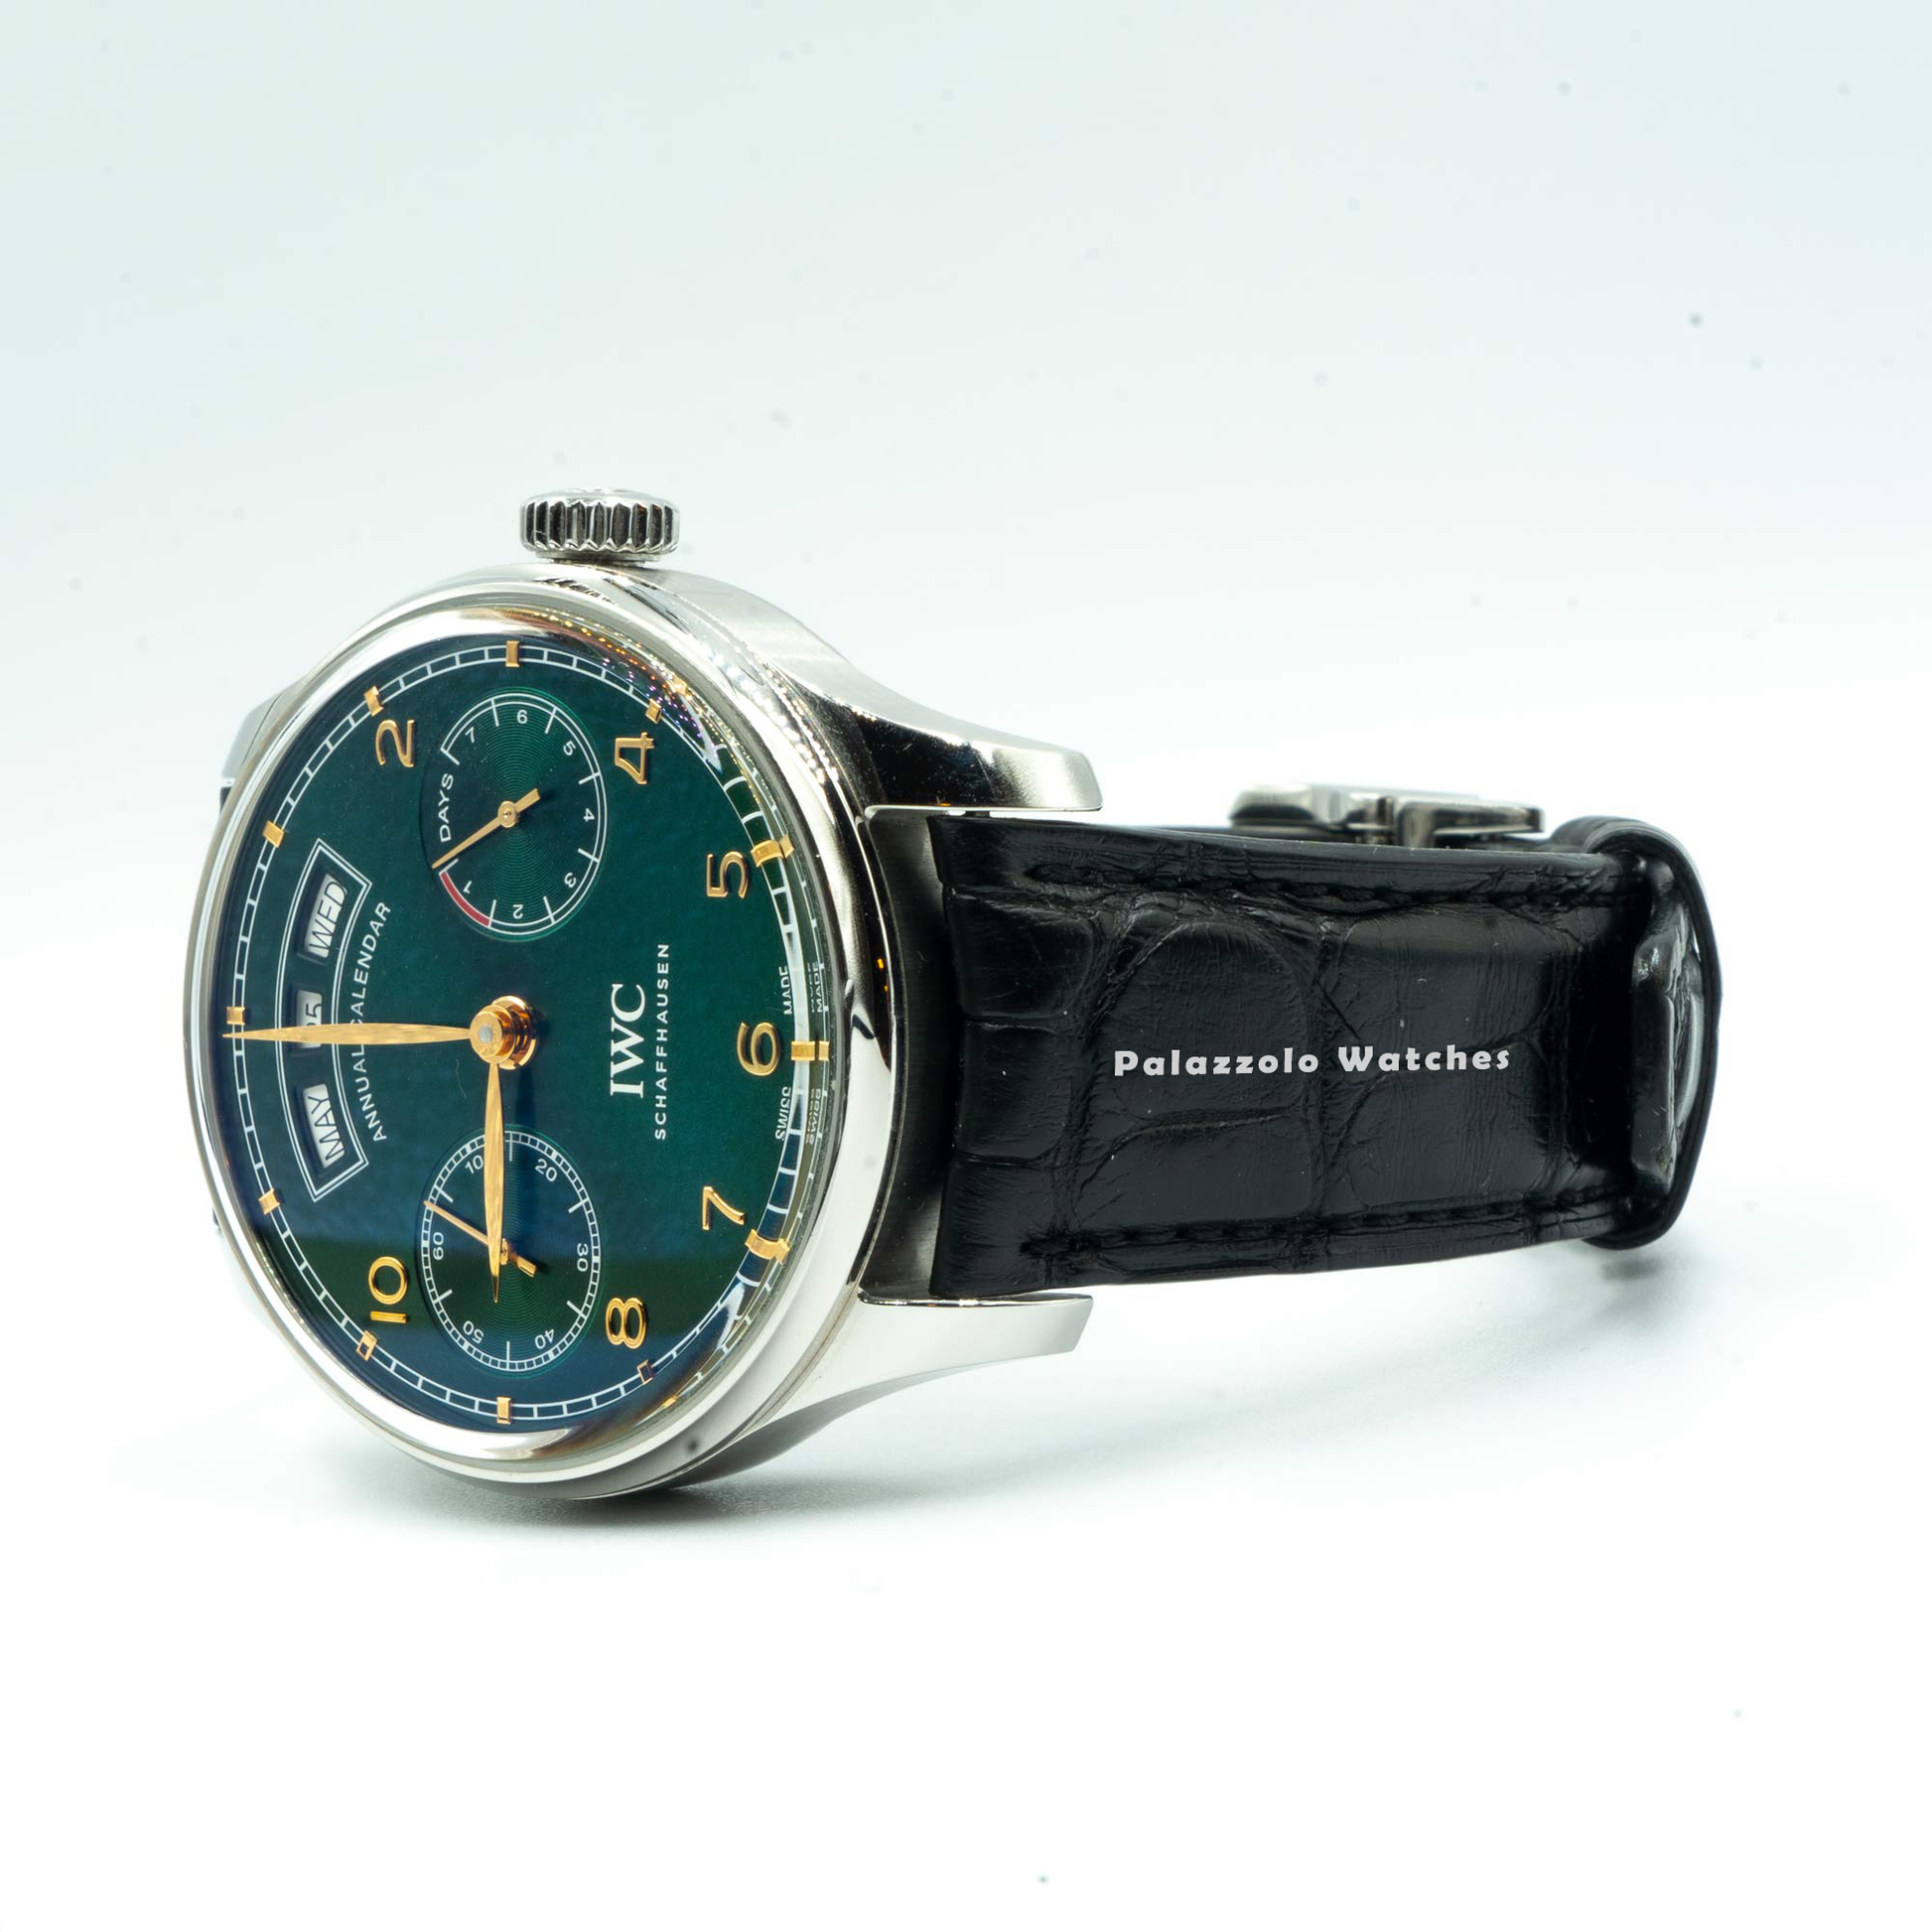 IWC Portugieser Annual Calendar Limited Edition 44mm - Palazzolo Watches